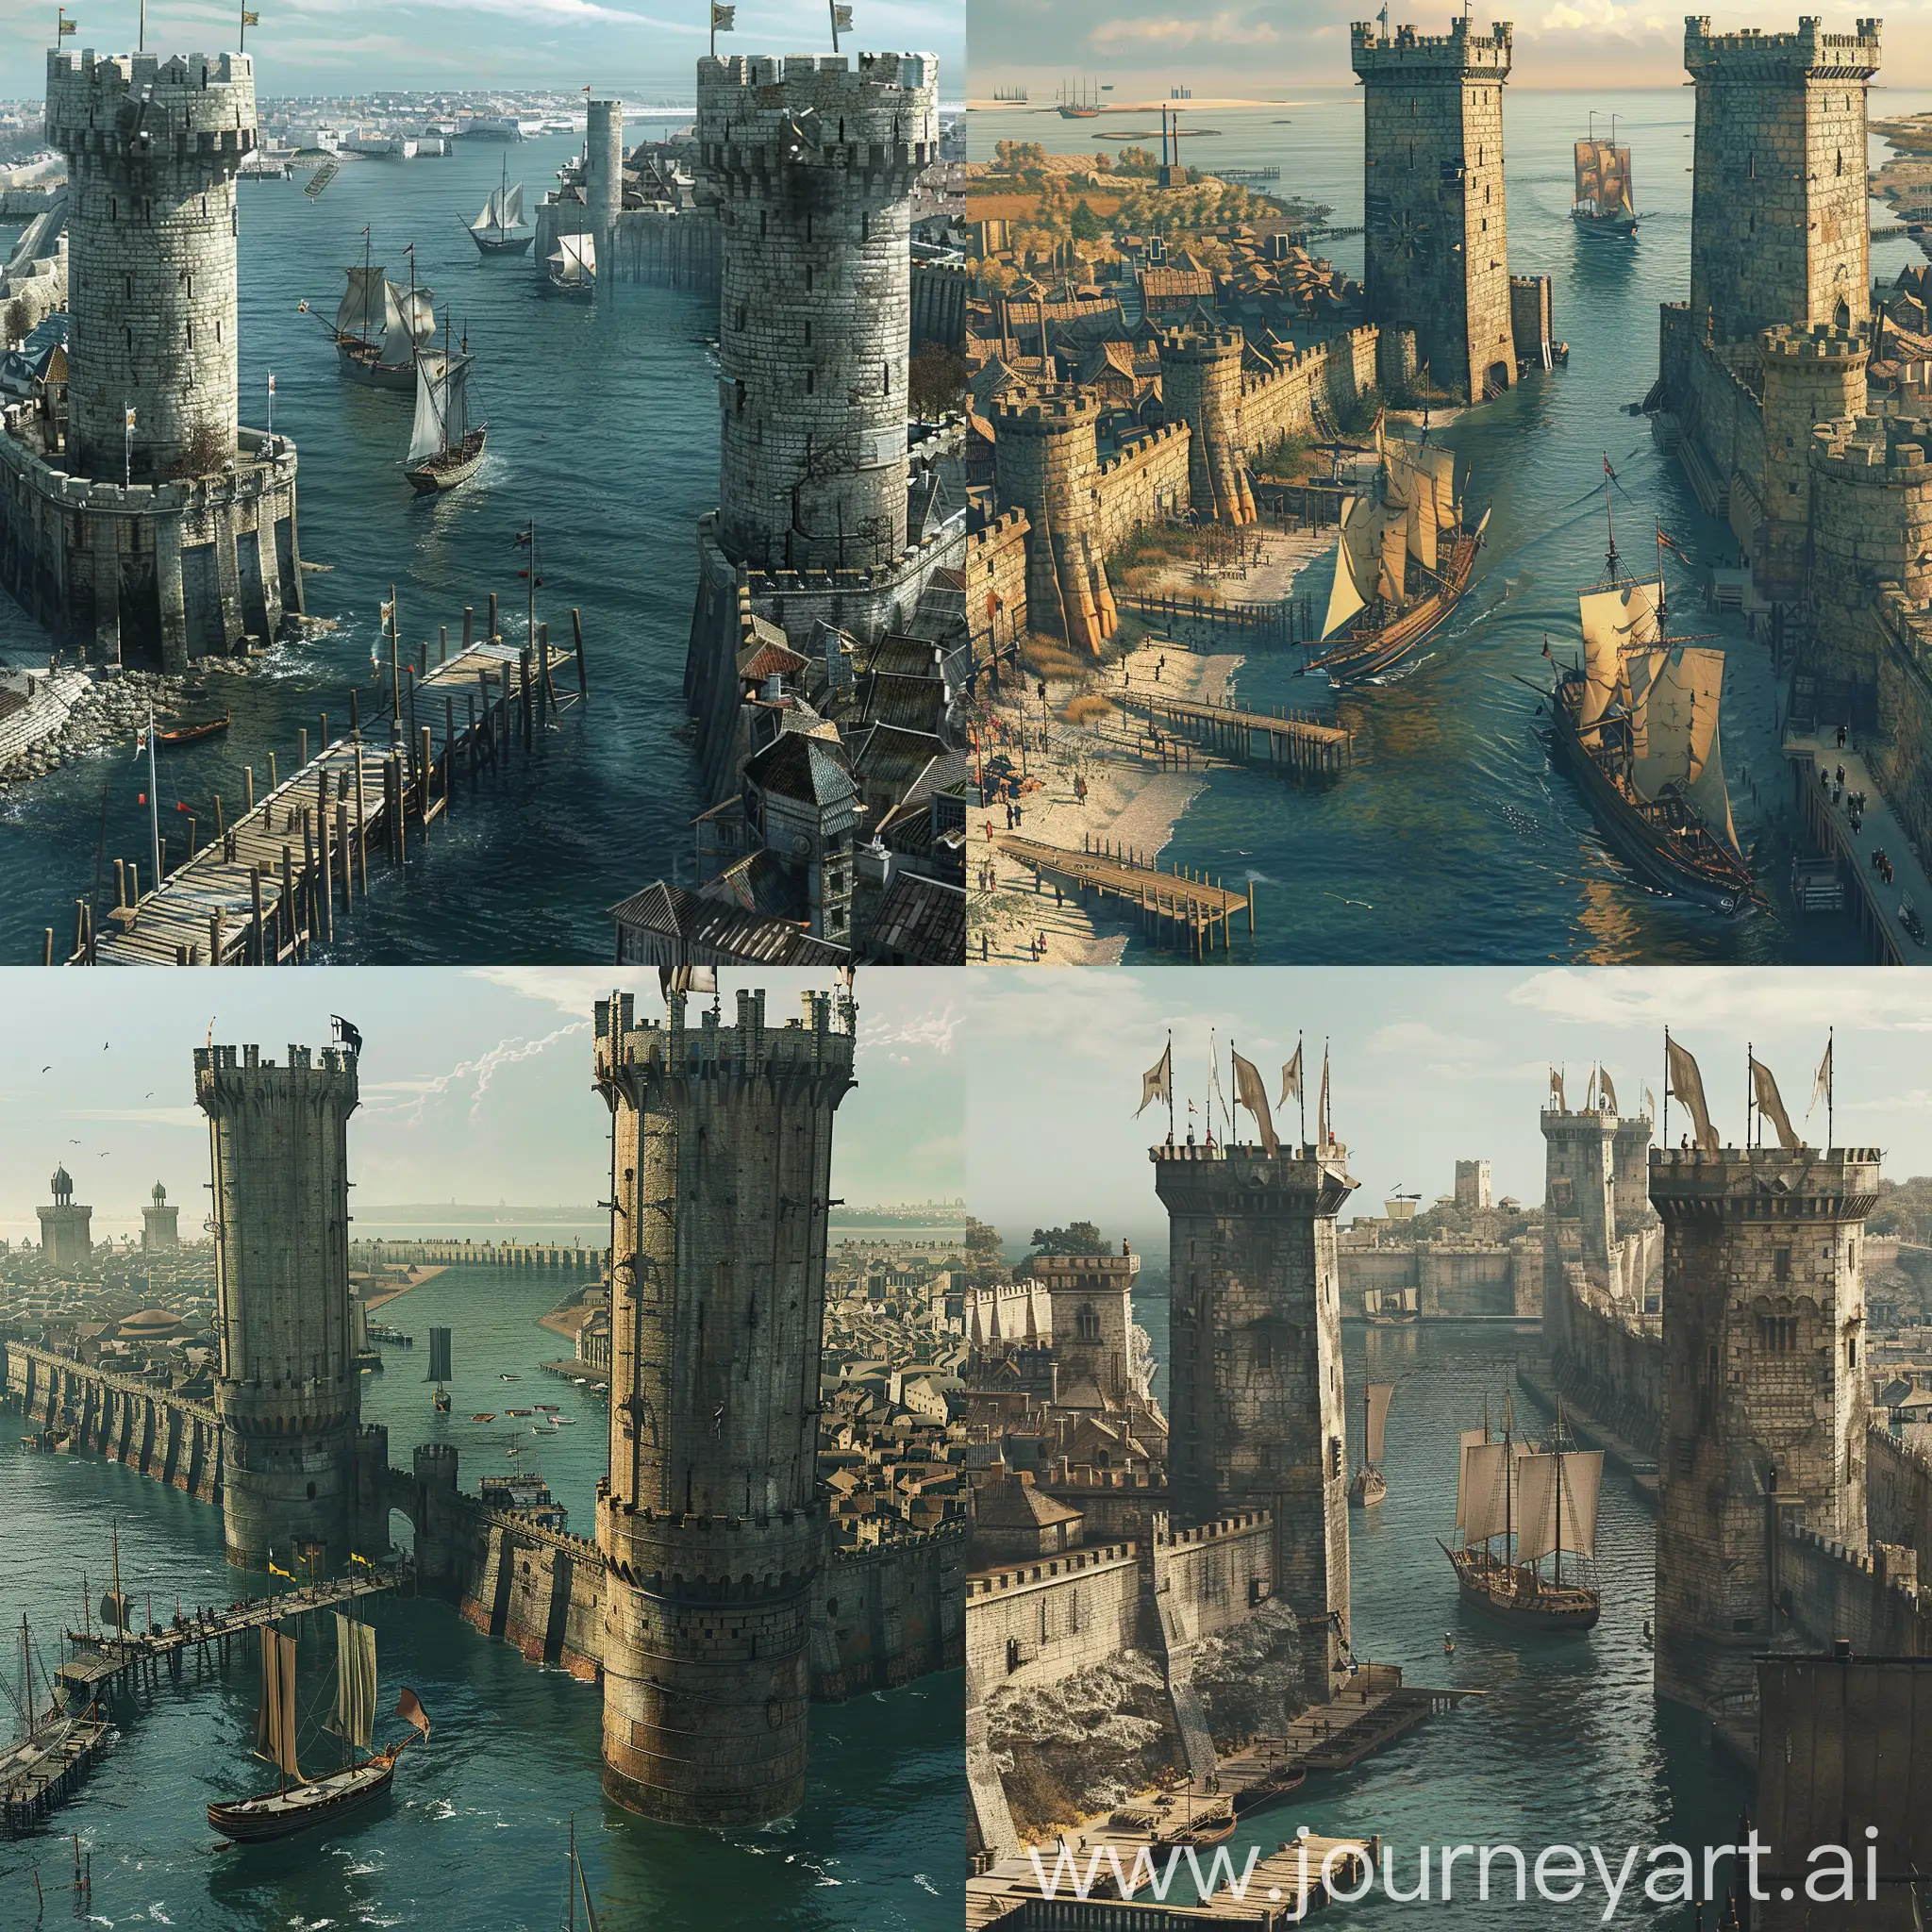 Scenic-Medieval-Port-City-with-Towers-and-Ships-Sailing